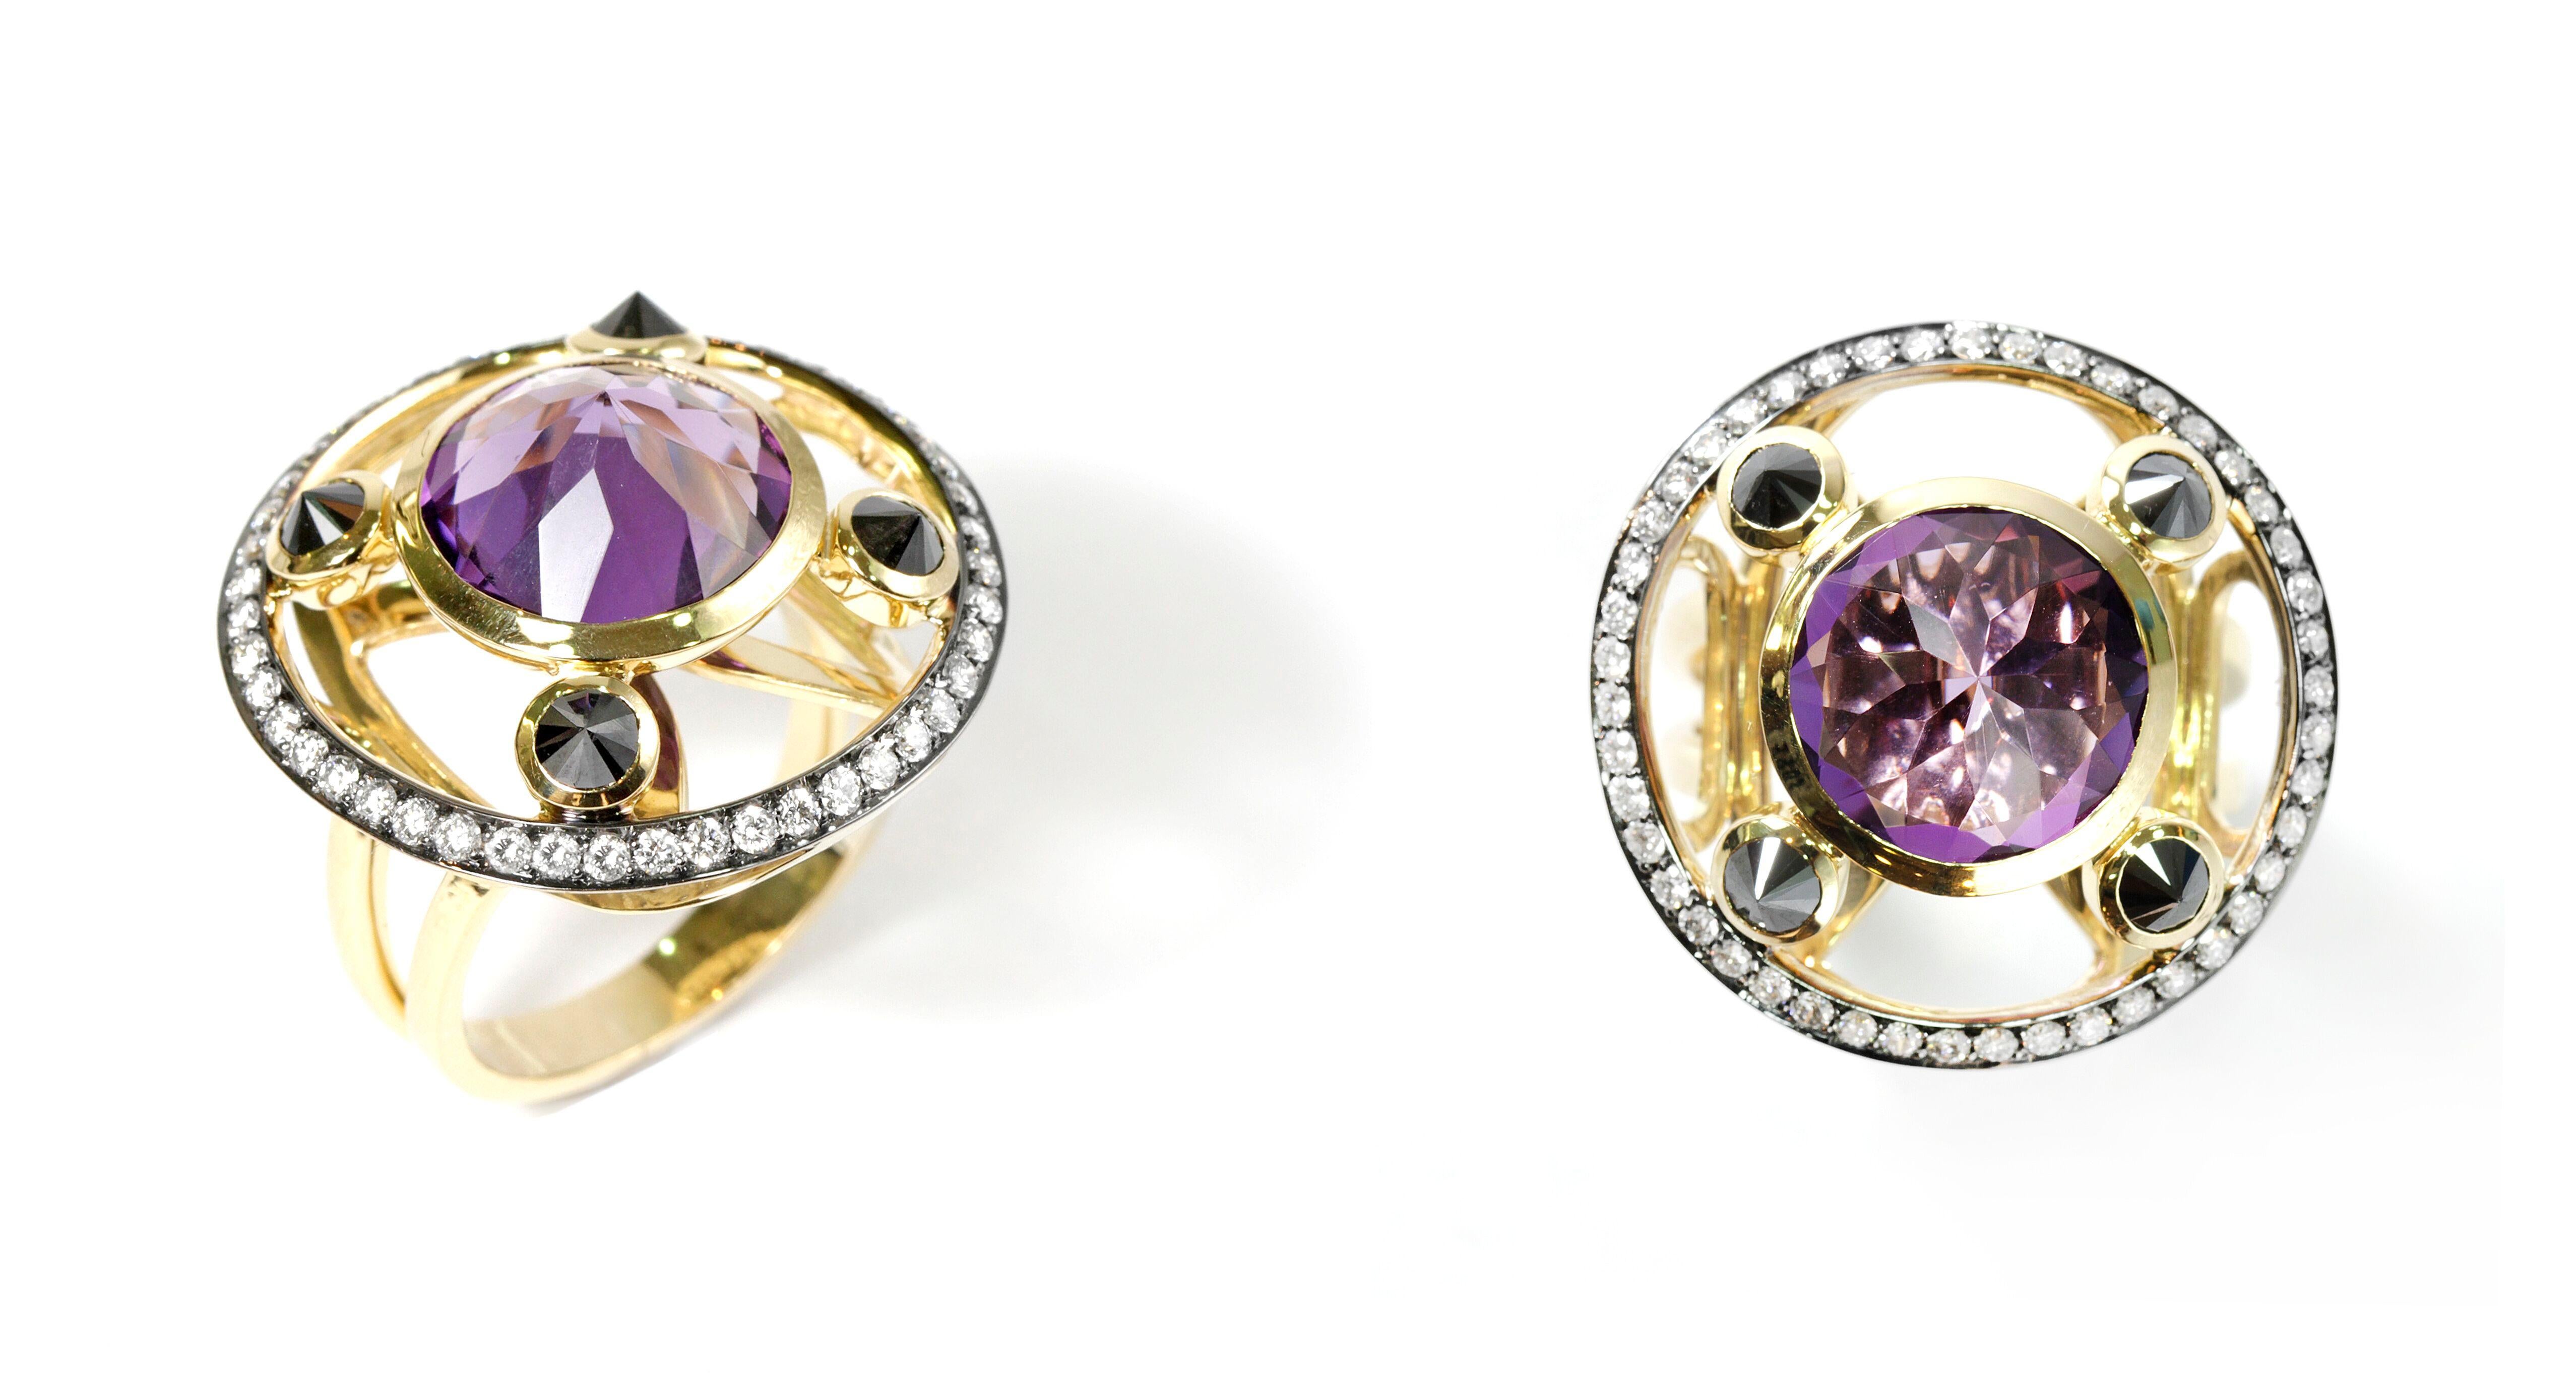 Designed exclusively By Ara Vartanian, this 18K Yellow Gold Ring features one Amethyst in a round faceted inverted cut, weighing 5,16ct (five carats and sixteen points), along with four inverted Black Diamonds in a round brilliant cut, with a total